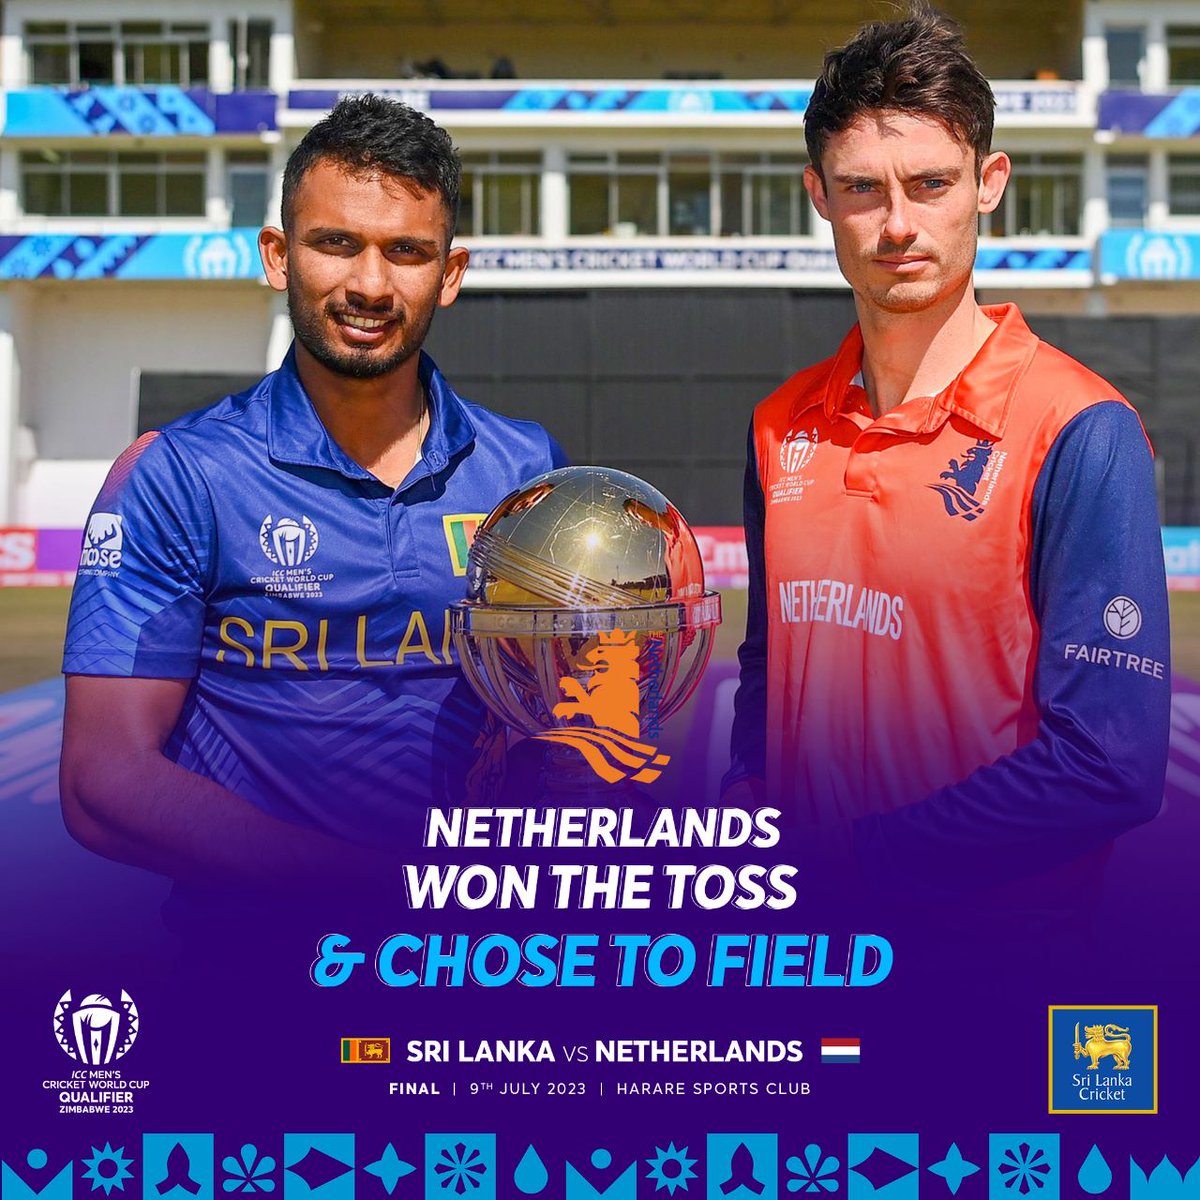 Netherlands won the toss and elected to field first!

#SLvNED #ReadyToRoar #CWC23